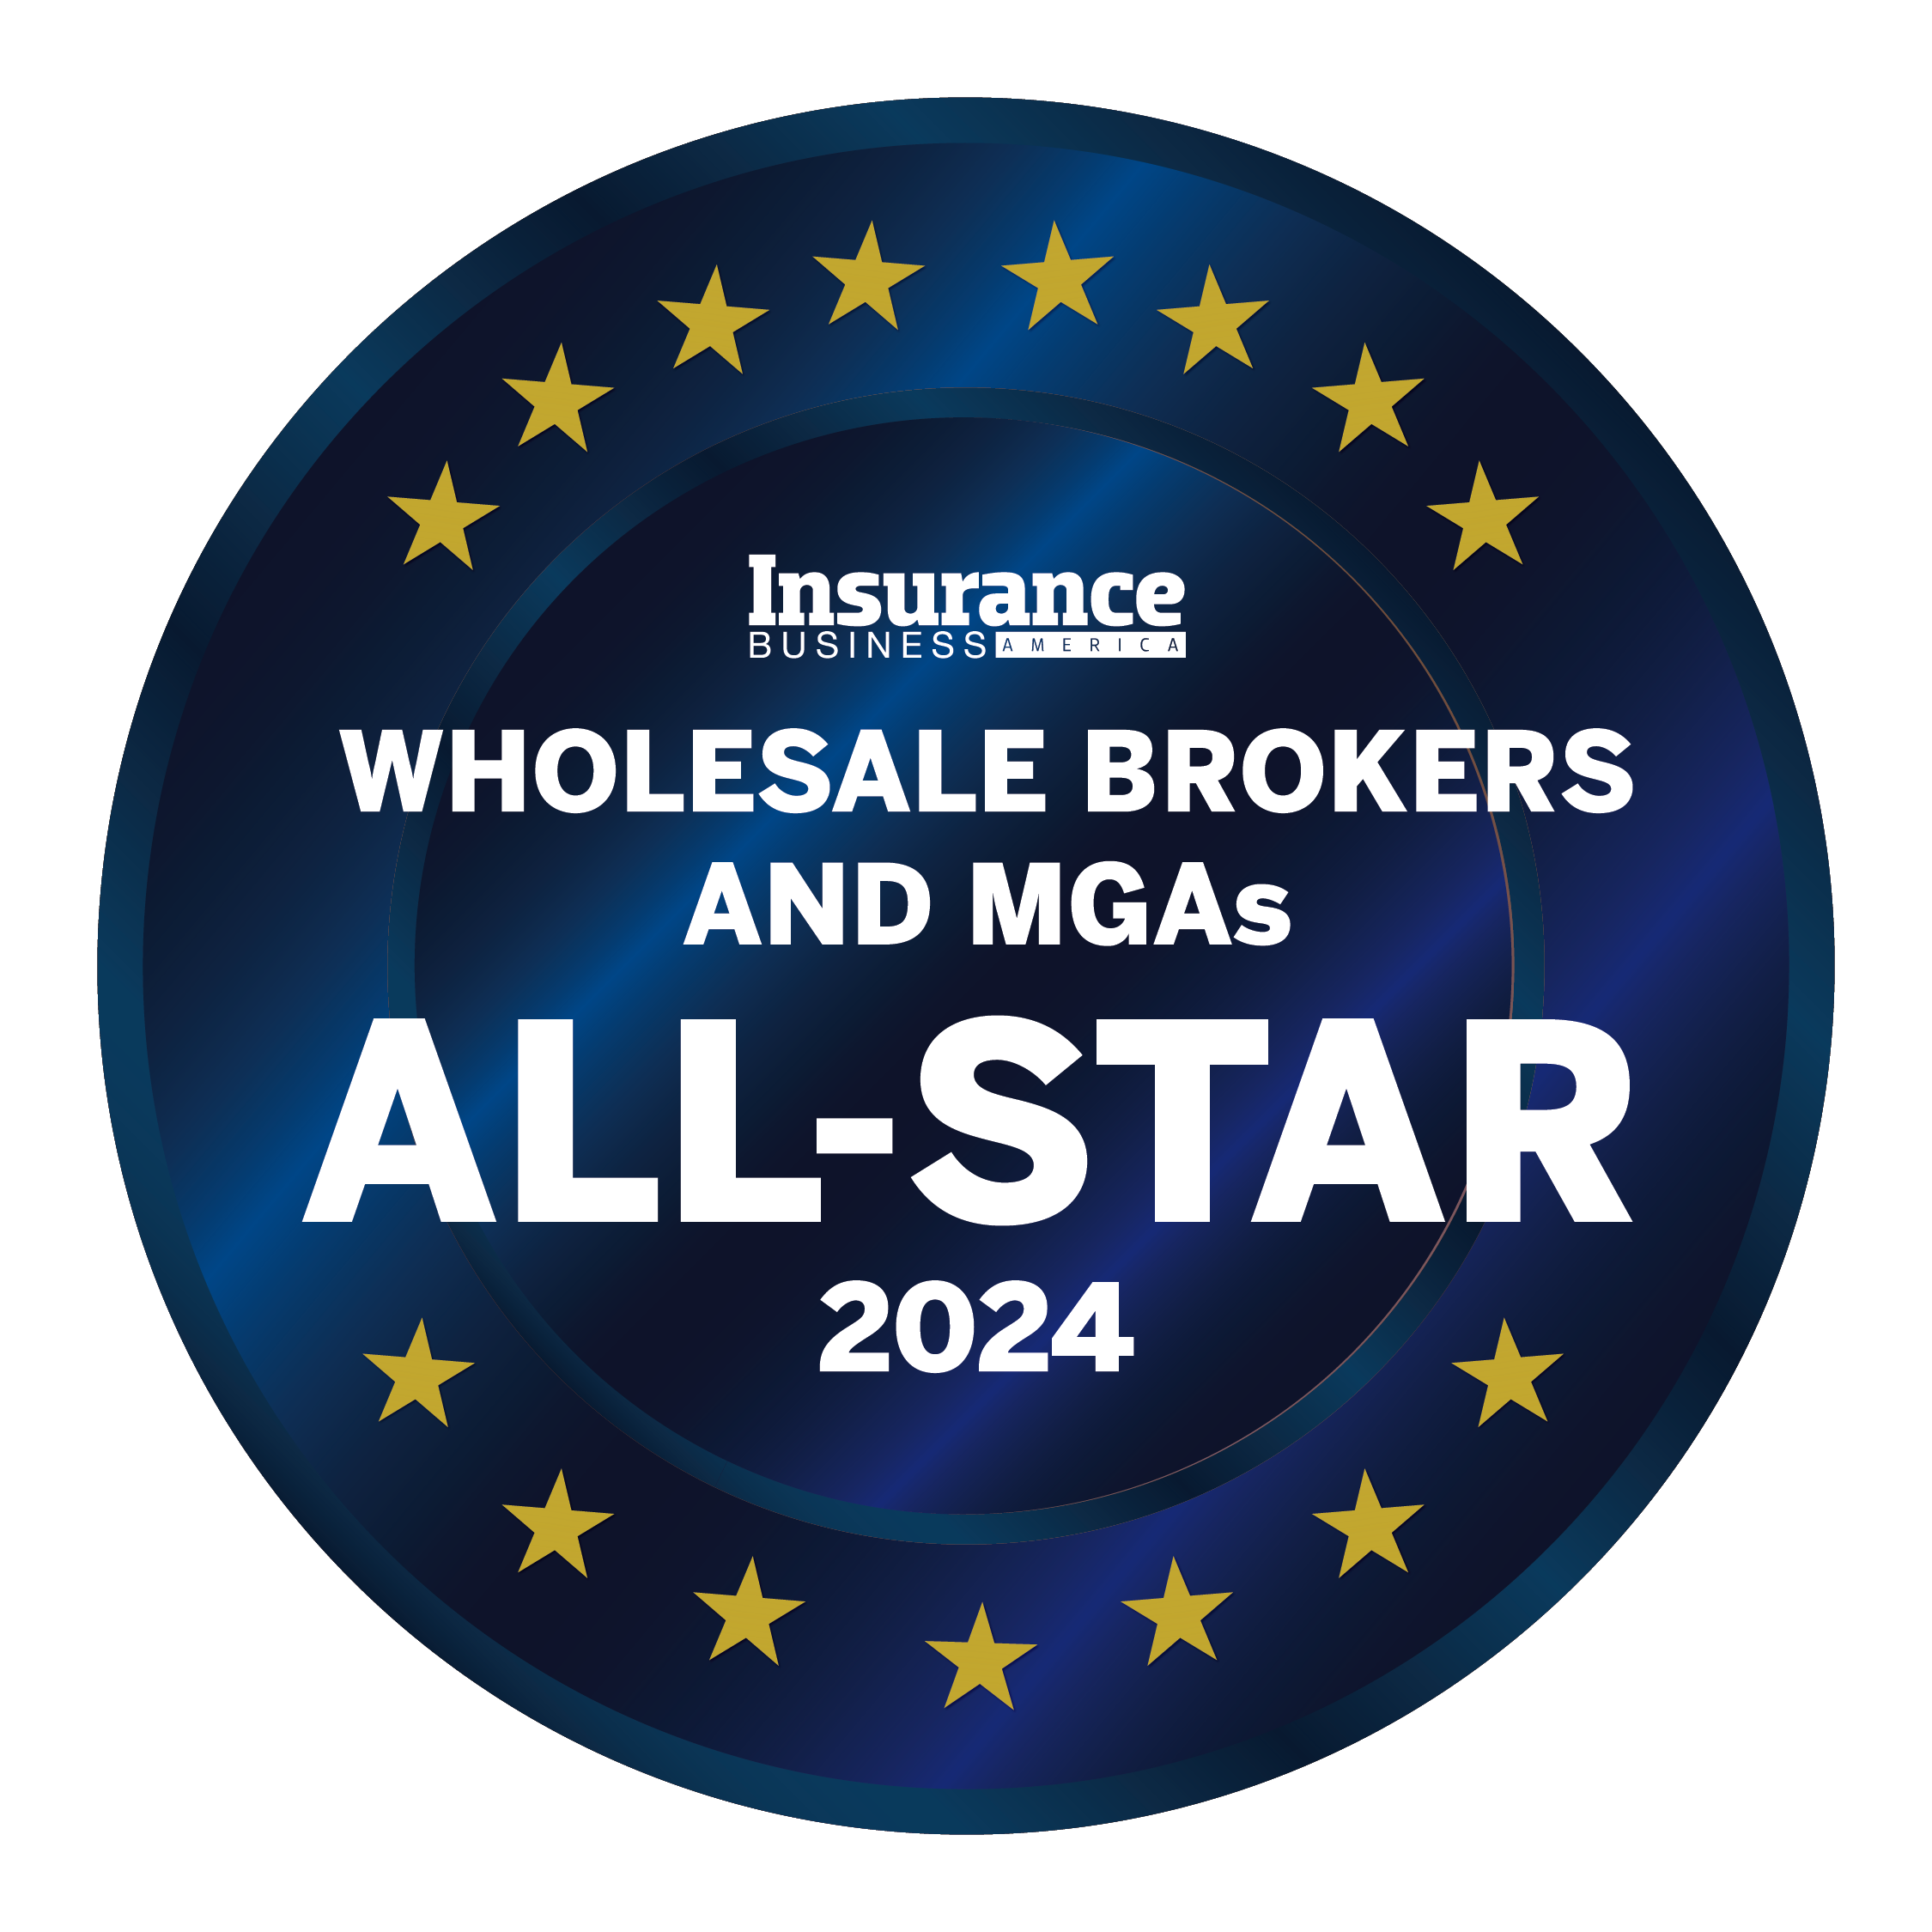 IBA 5-Star Wholesale Brokers and MGAs - All Star 2024 (1)